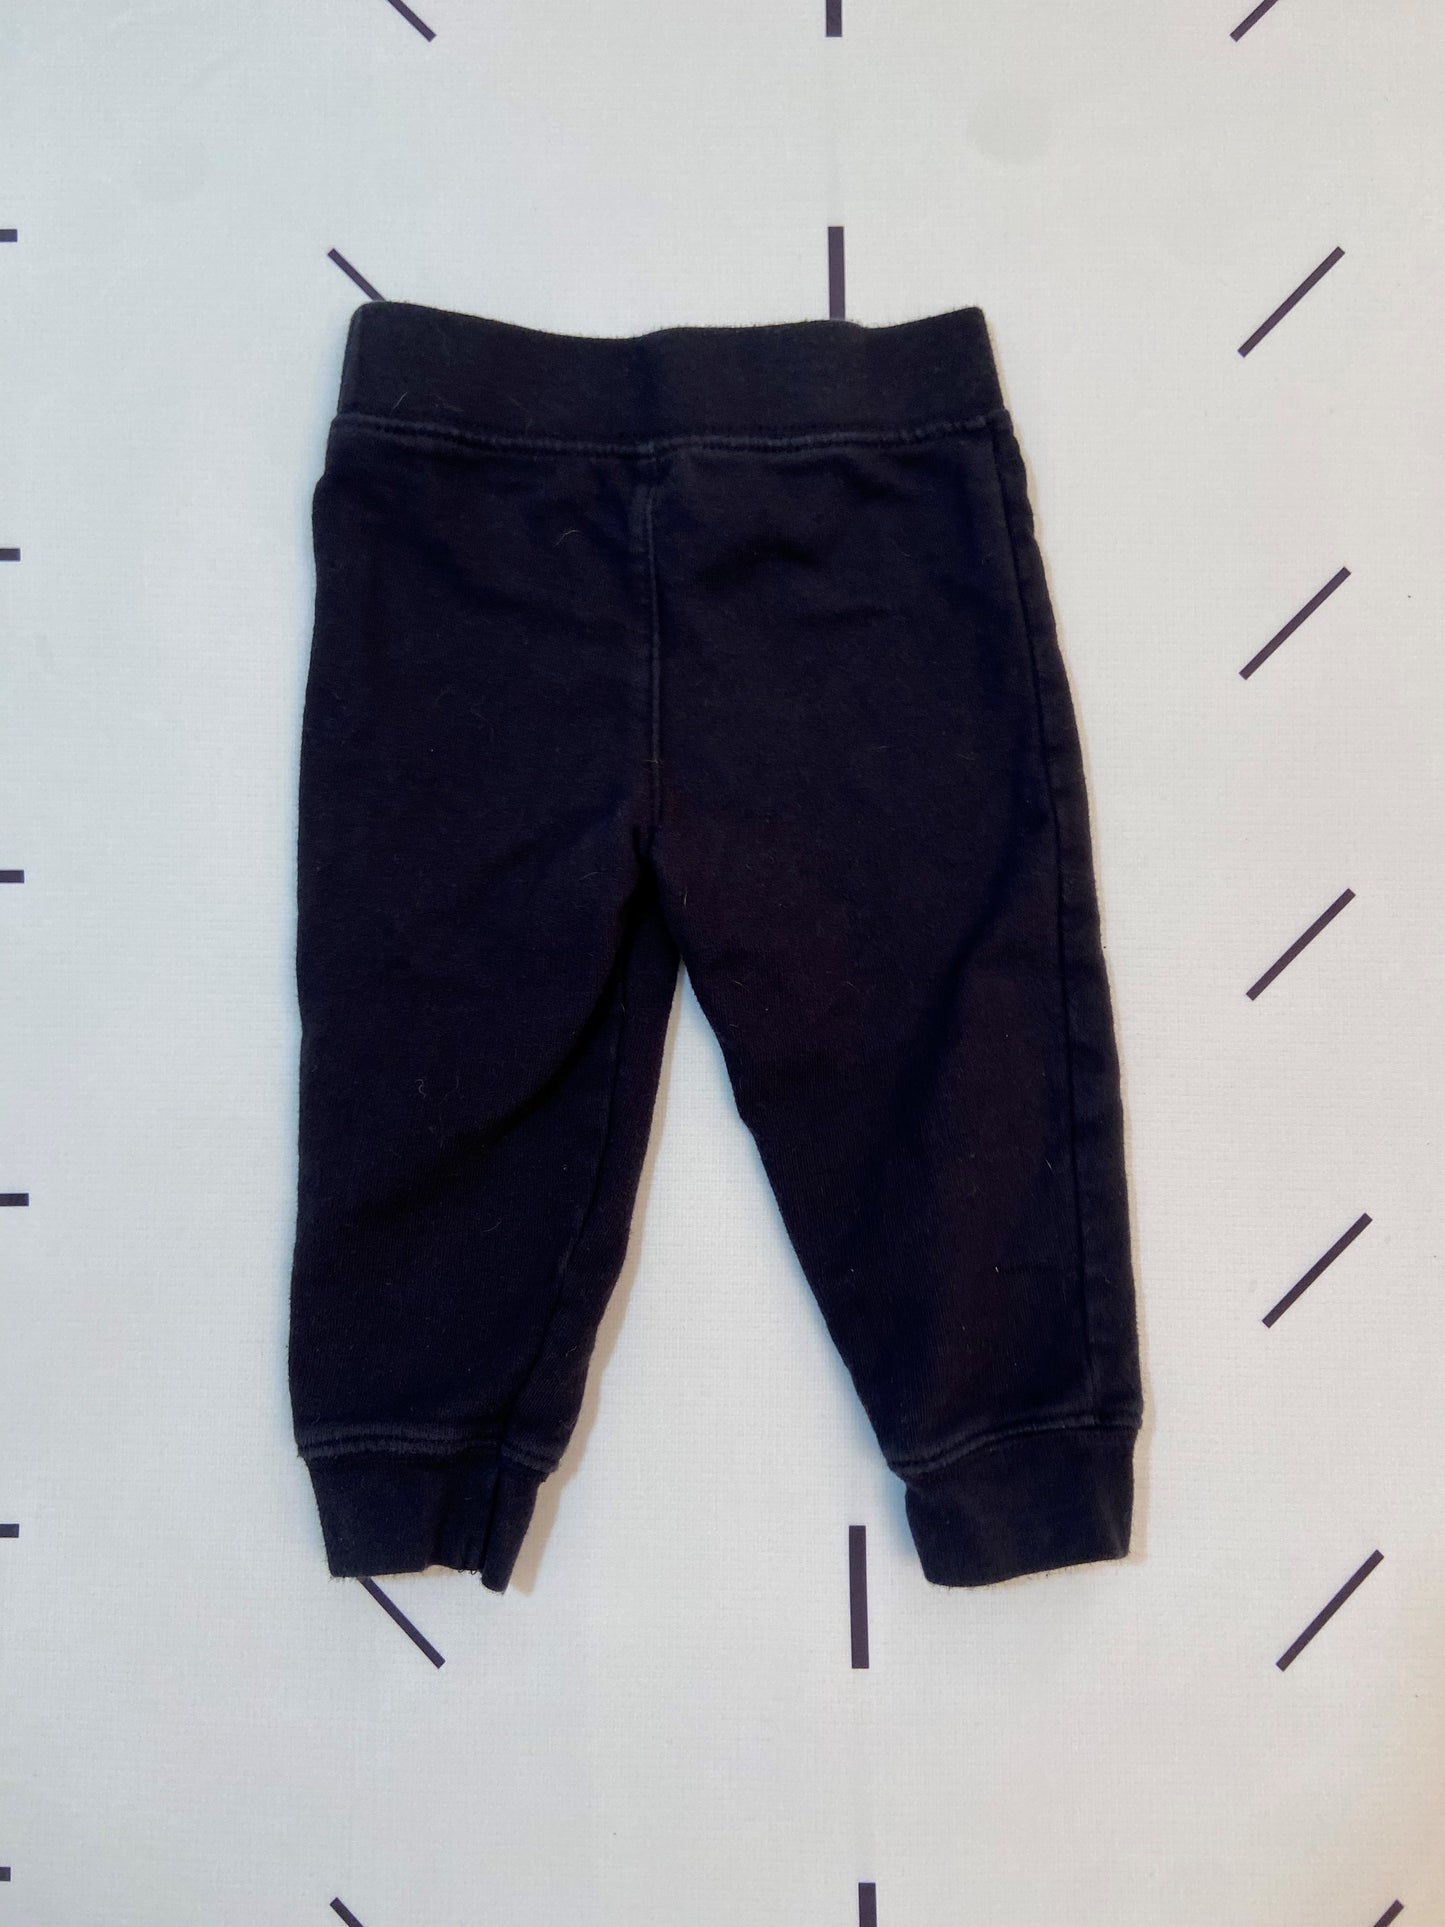 Black Pull-On Joggers - 12 Months